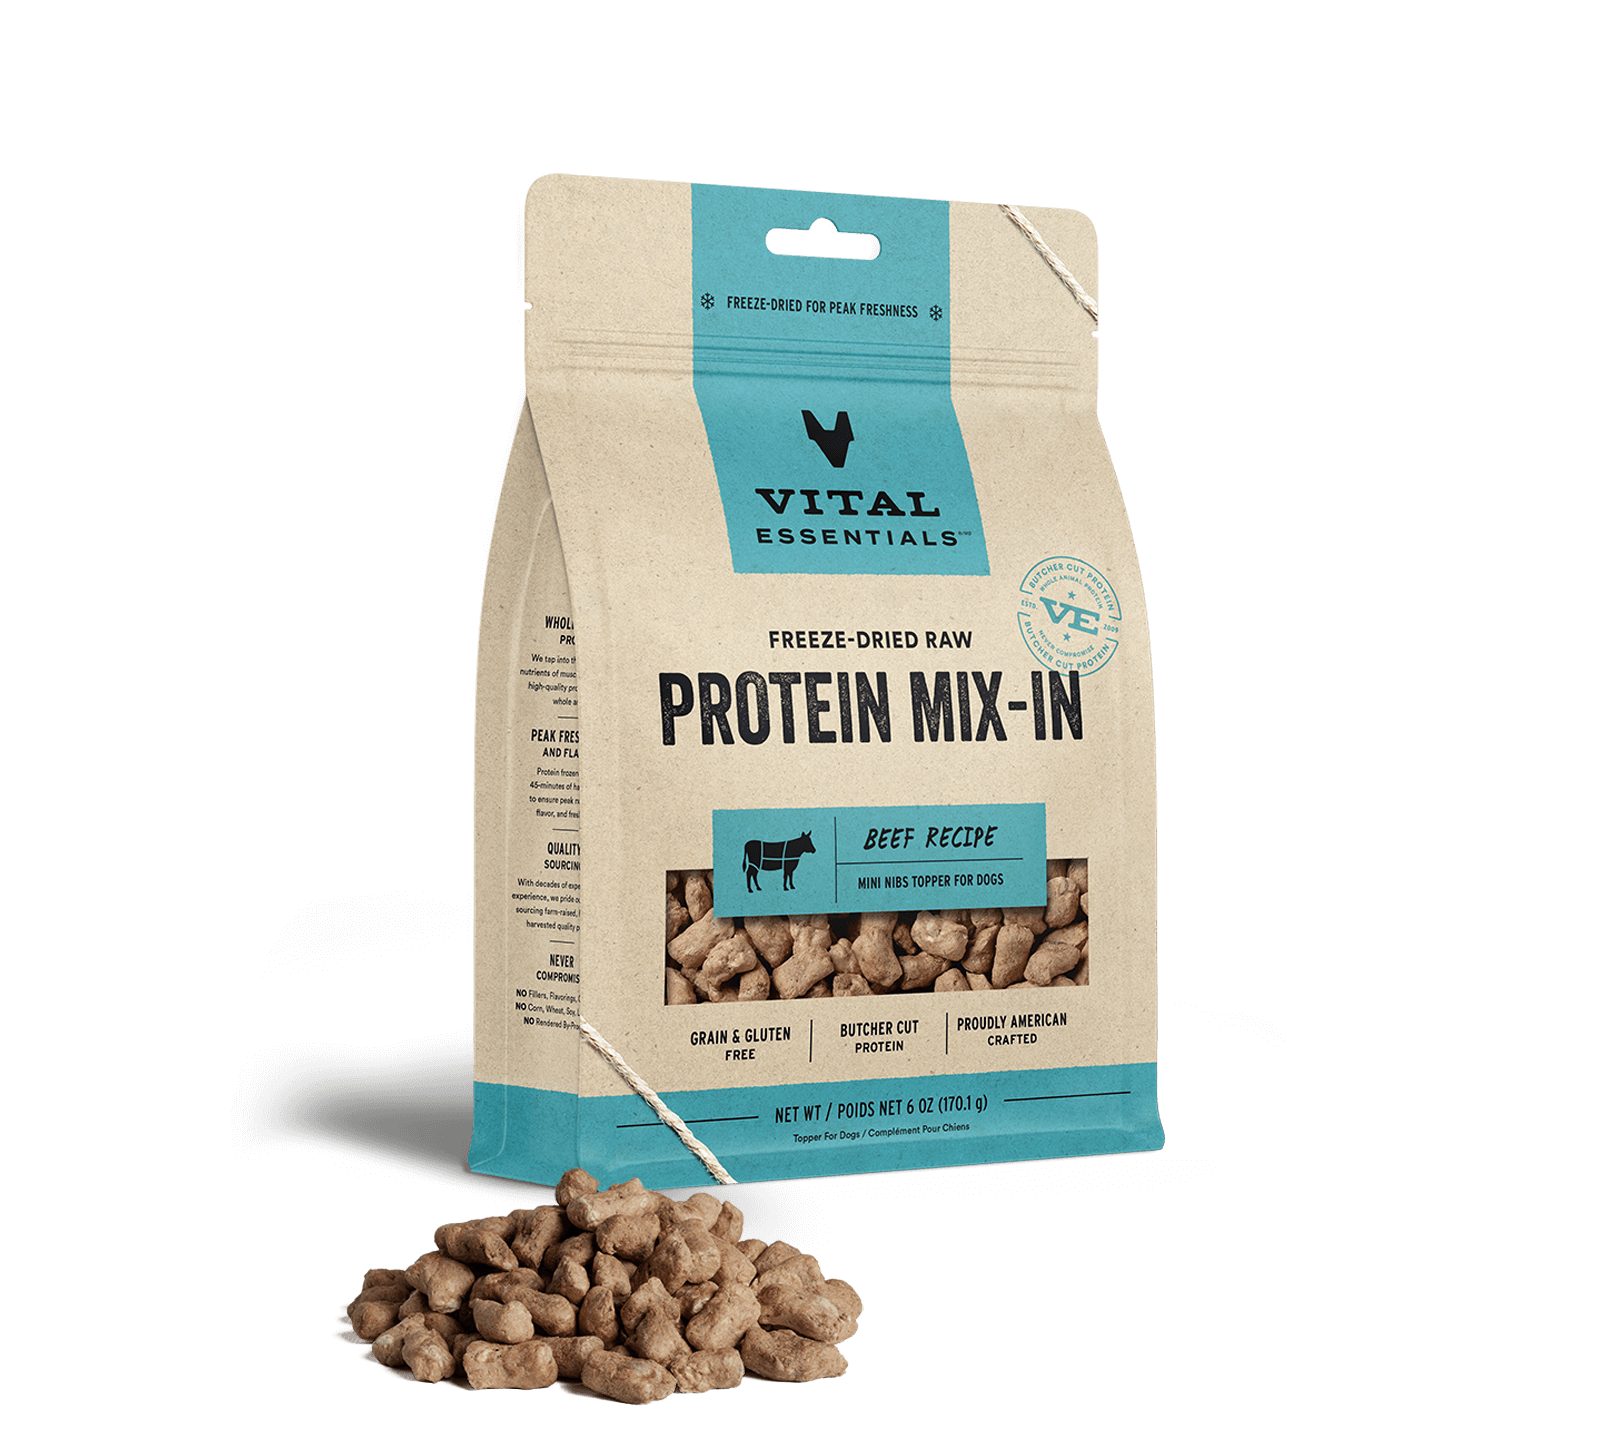 Vital Essentials Freeze-Dried Raw Protein Mix-In Beef Recipe Mini Nibs Topper for Dogs, 6 oz - Healing/First Aid